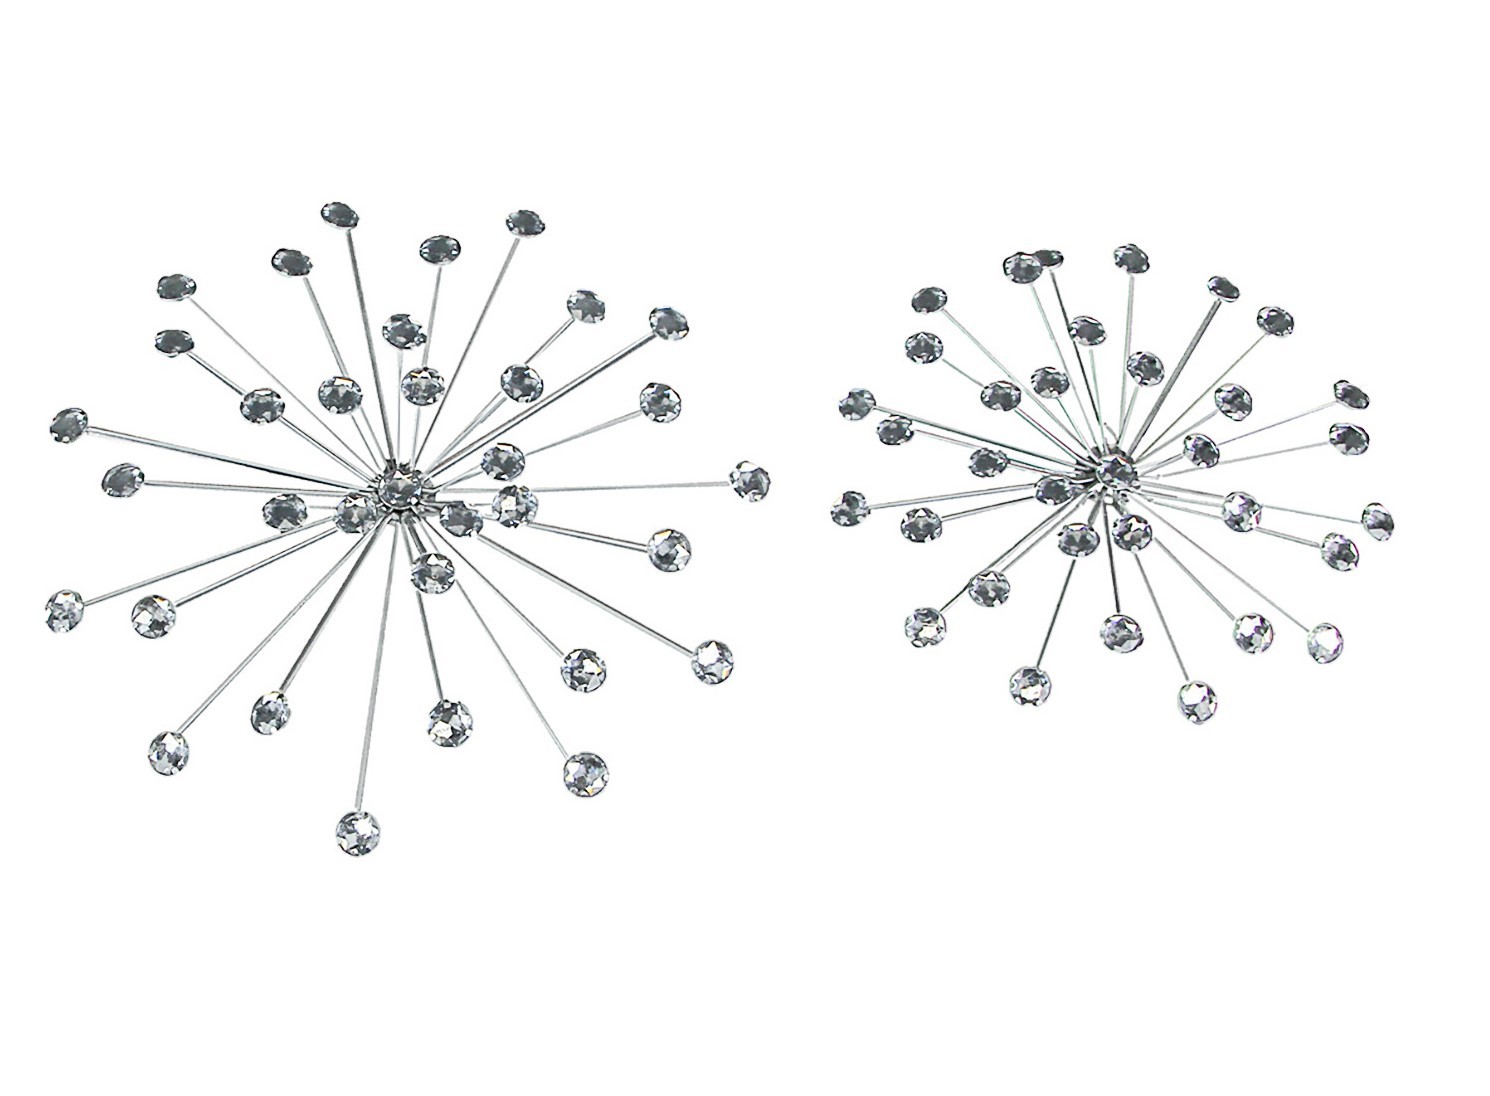 Primary image for Scratch & Dent Jeweled Metal Sunburst Wall Mounted Hanging Sculpture Set of 2